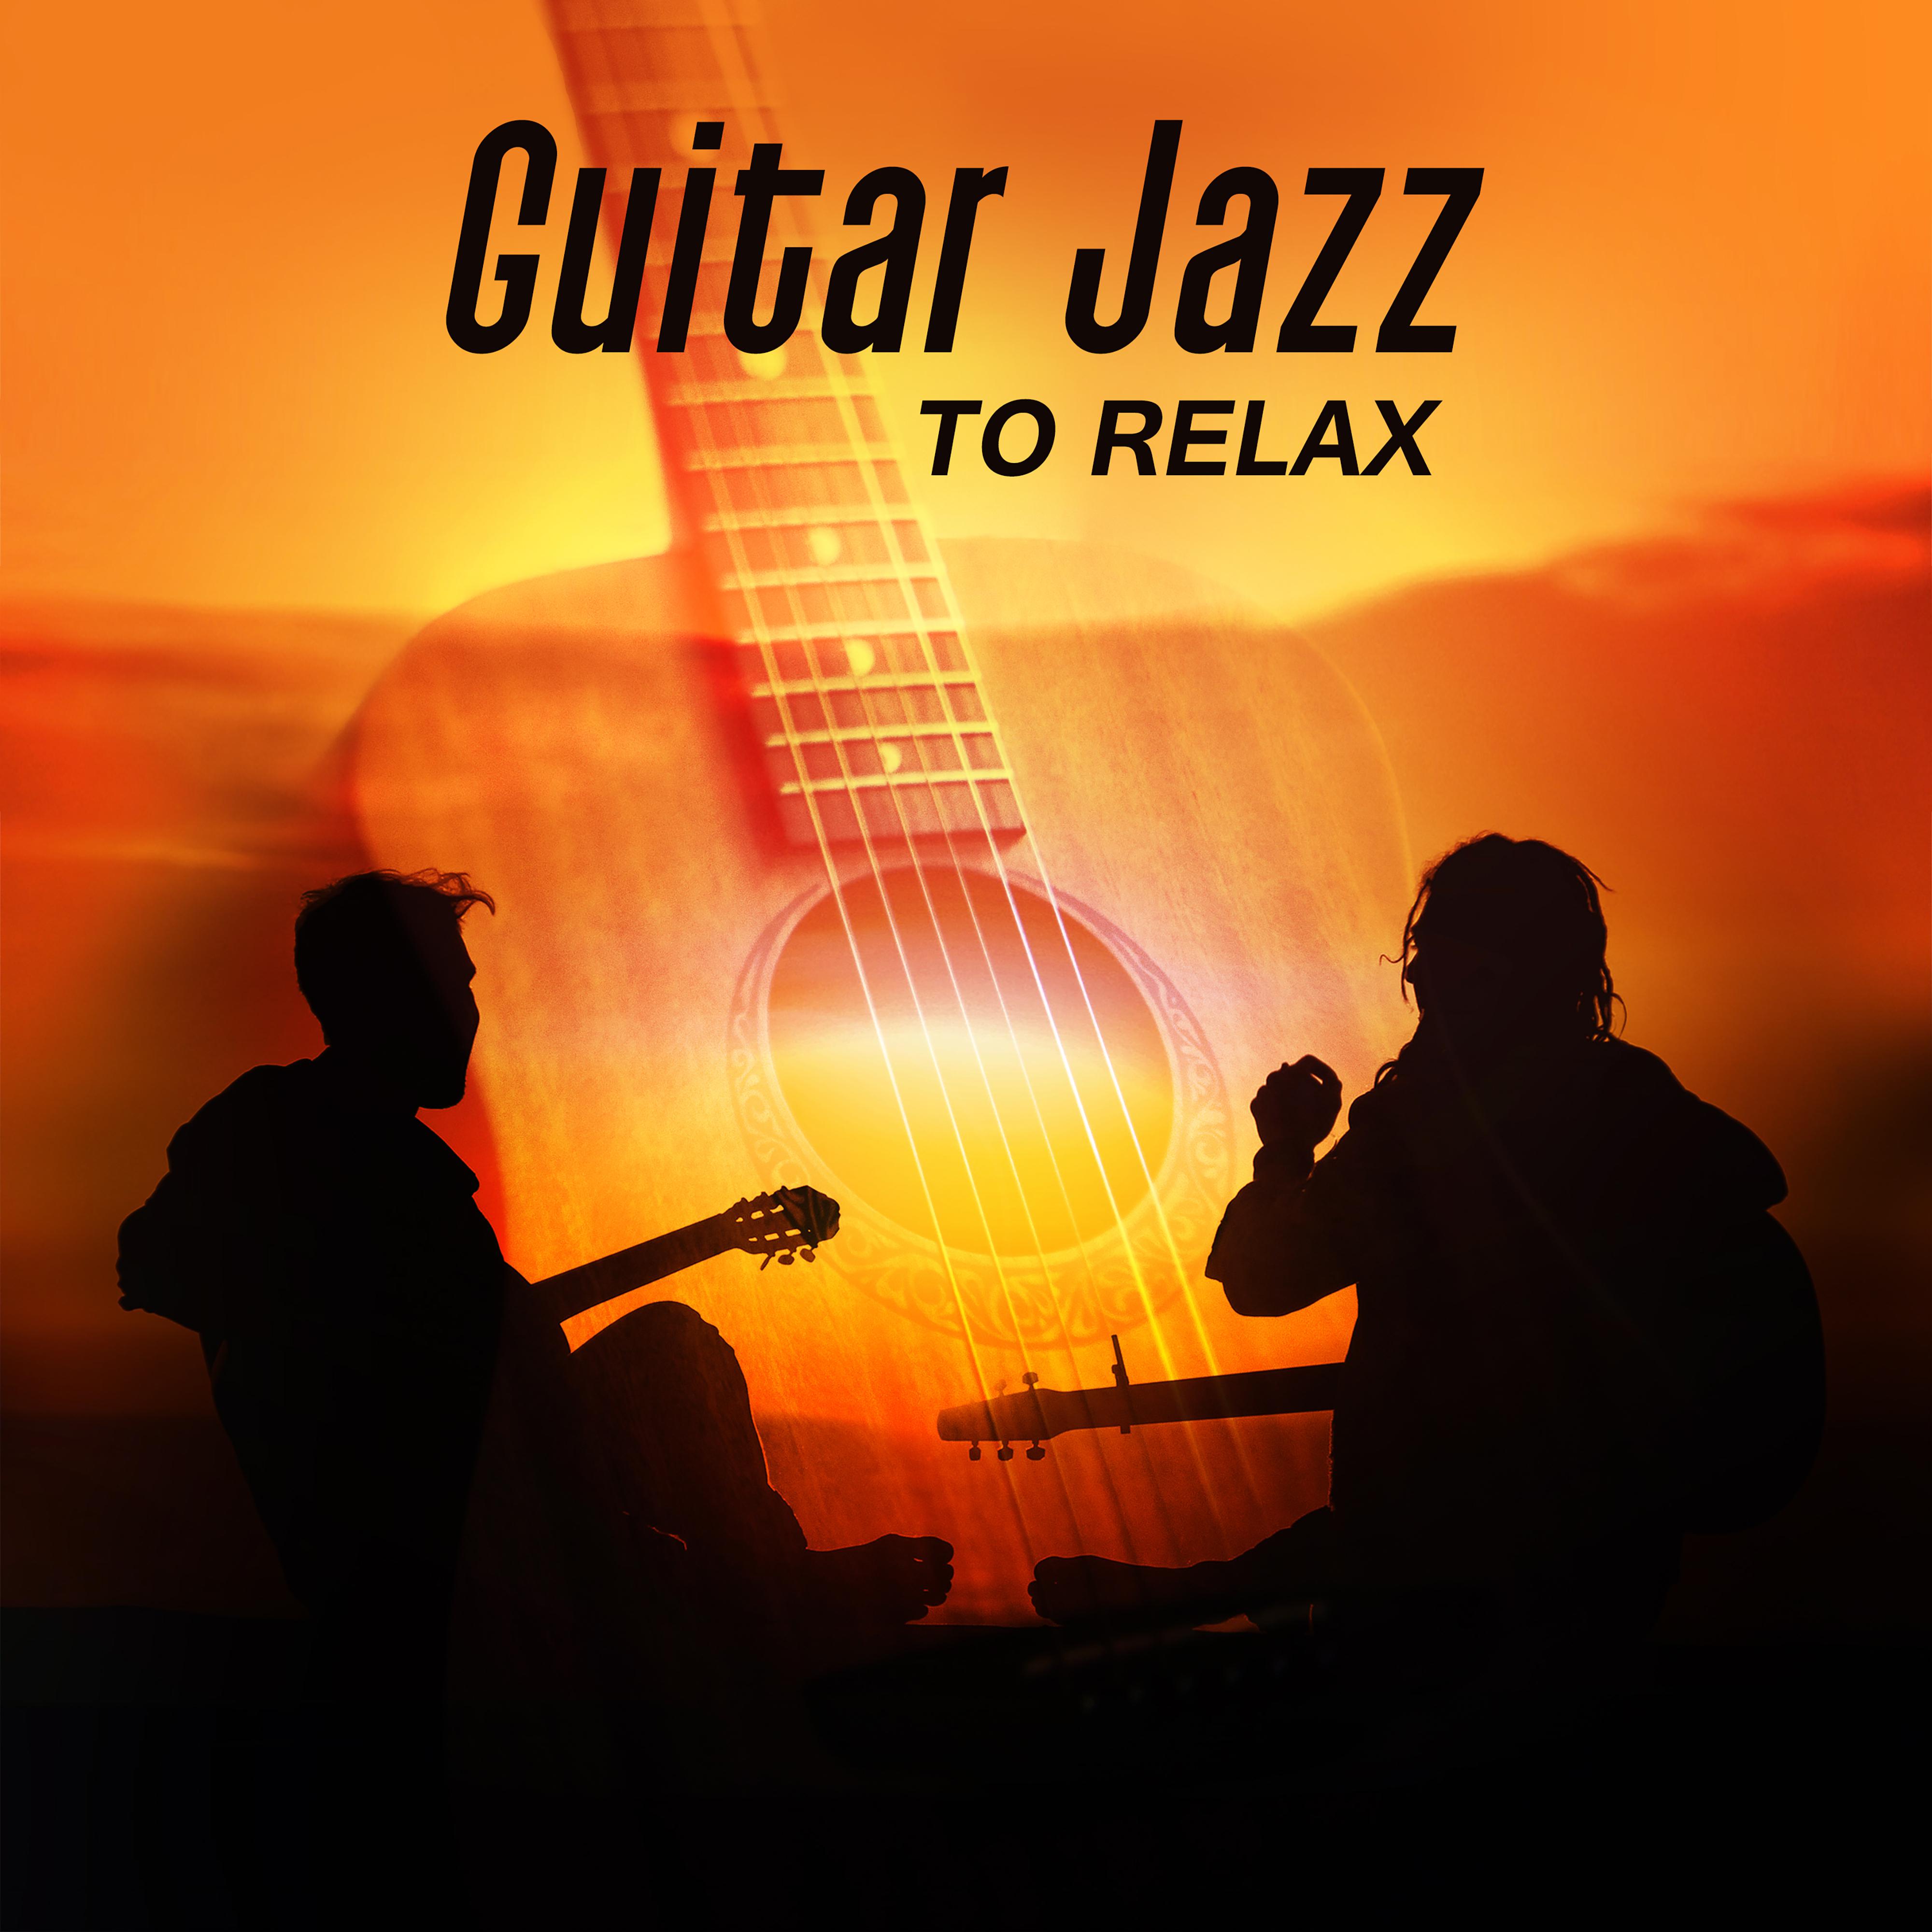 Guitar Jazz to Relax  Moonlight Jazz, Evening Relaxation with Guitar, Instrumental Sounds to Chill